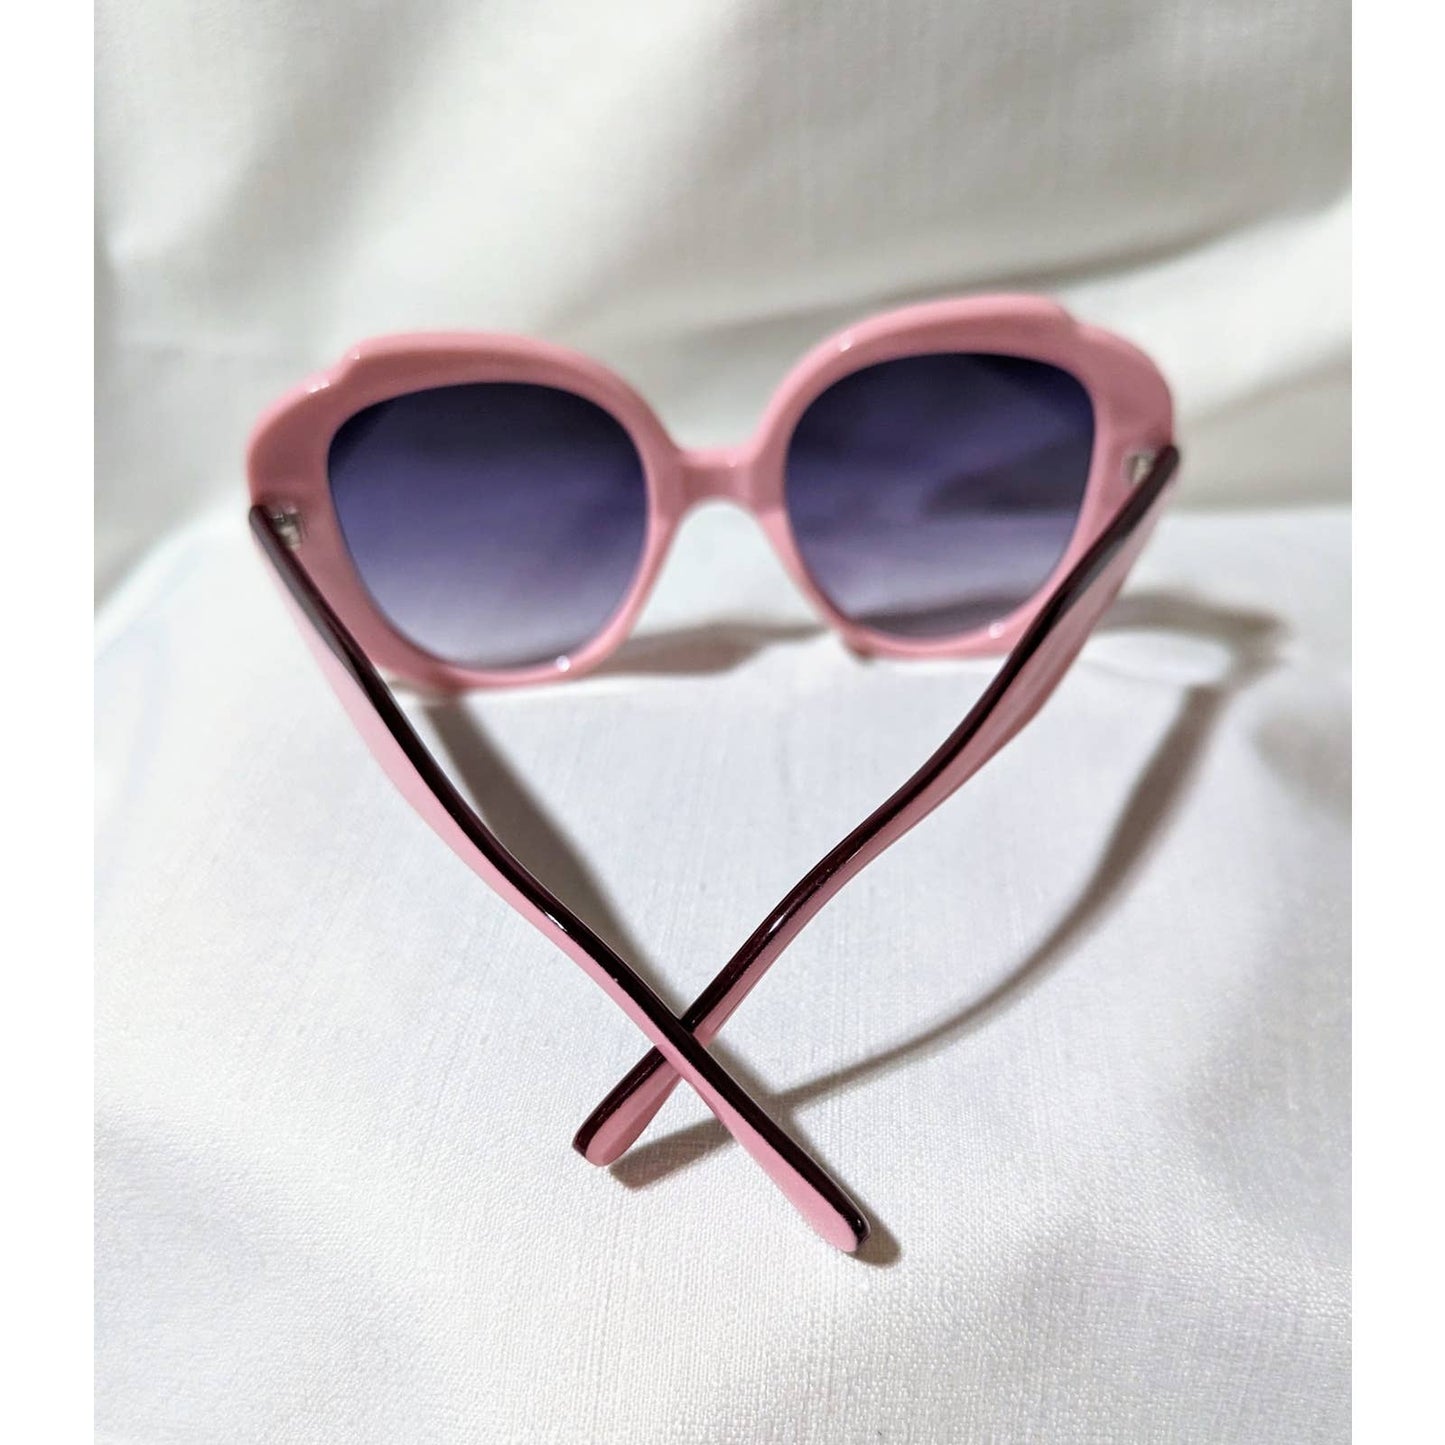 Mimi Pink Retro Vintage Style Butterfly Sunglasses with Gray Lenses UV Protection